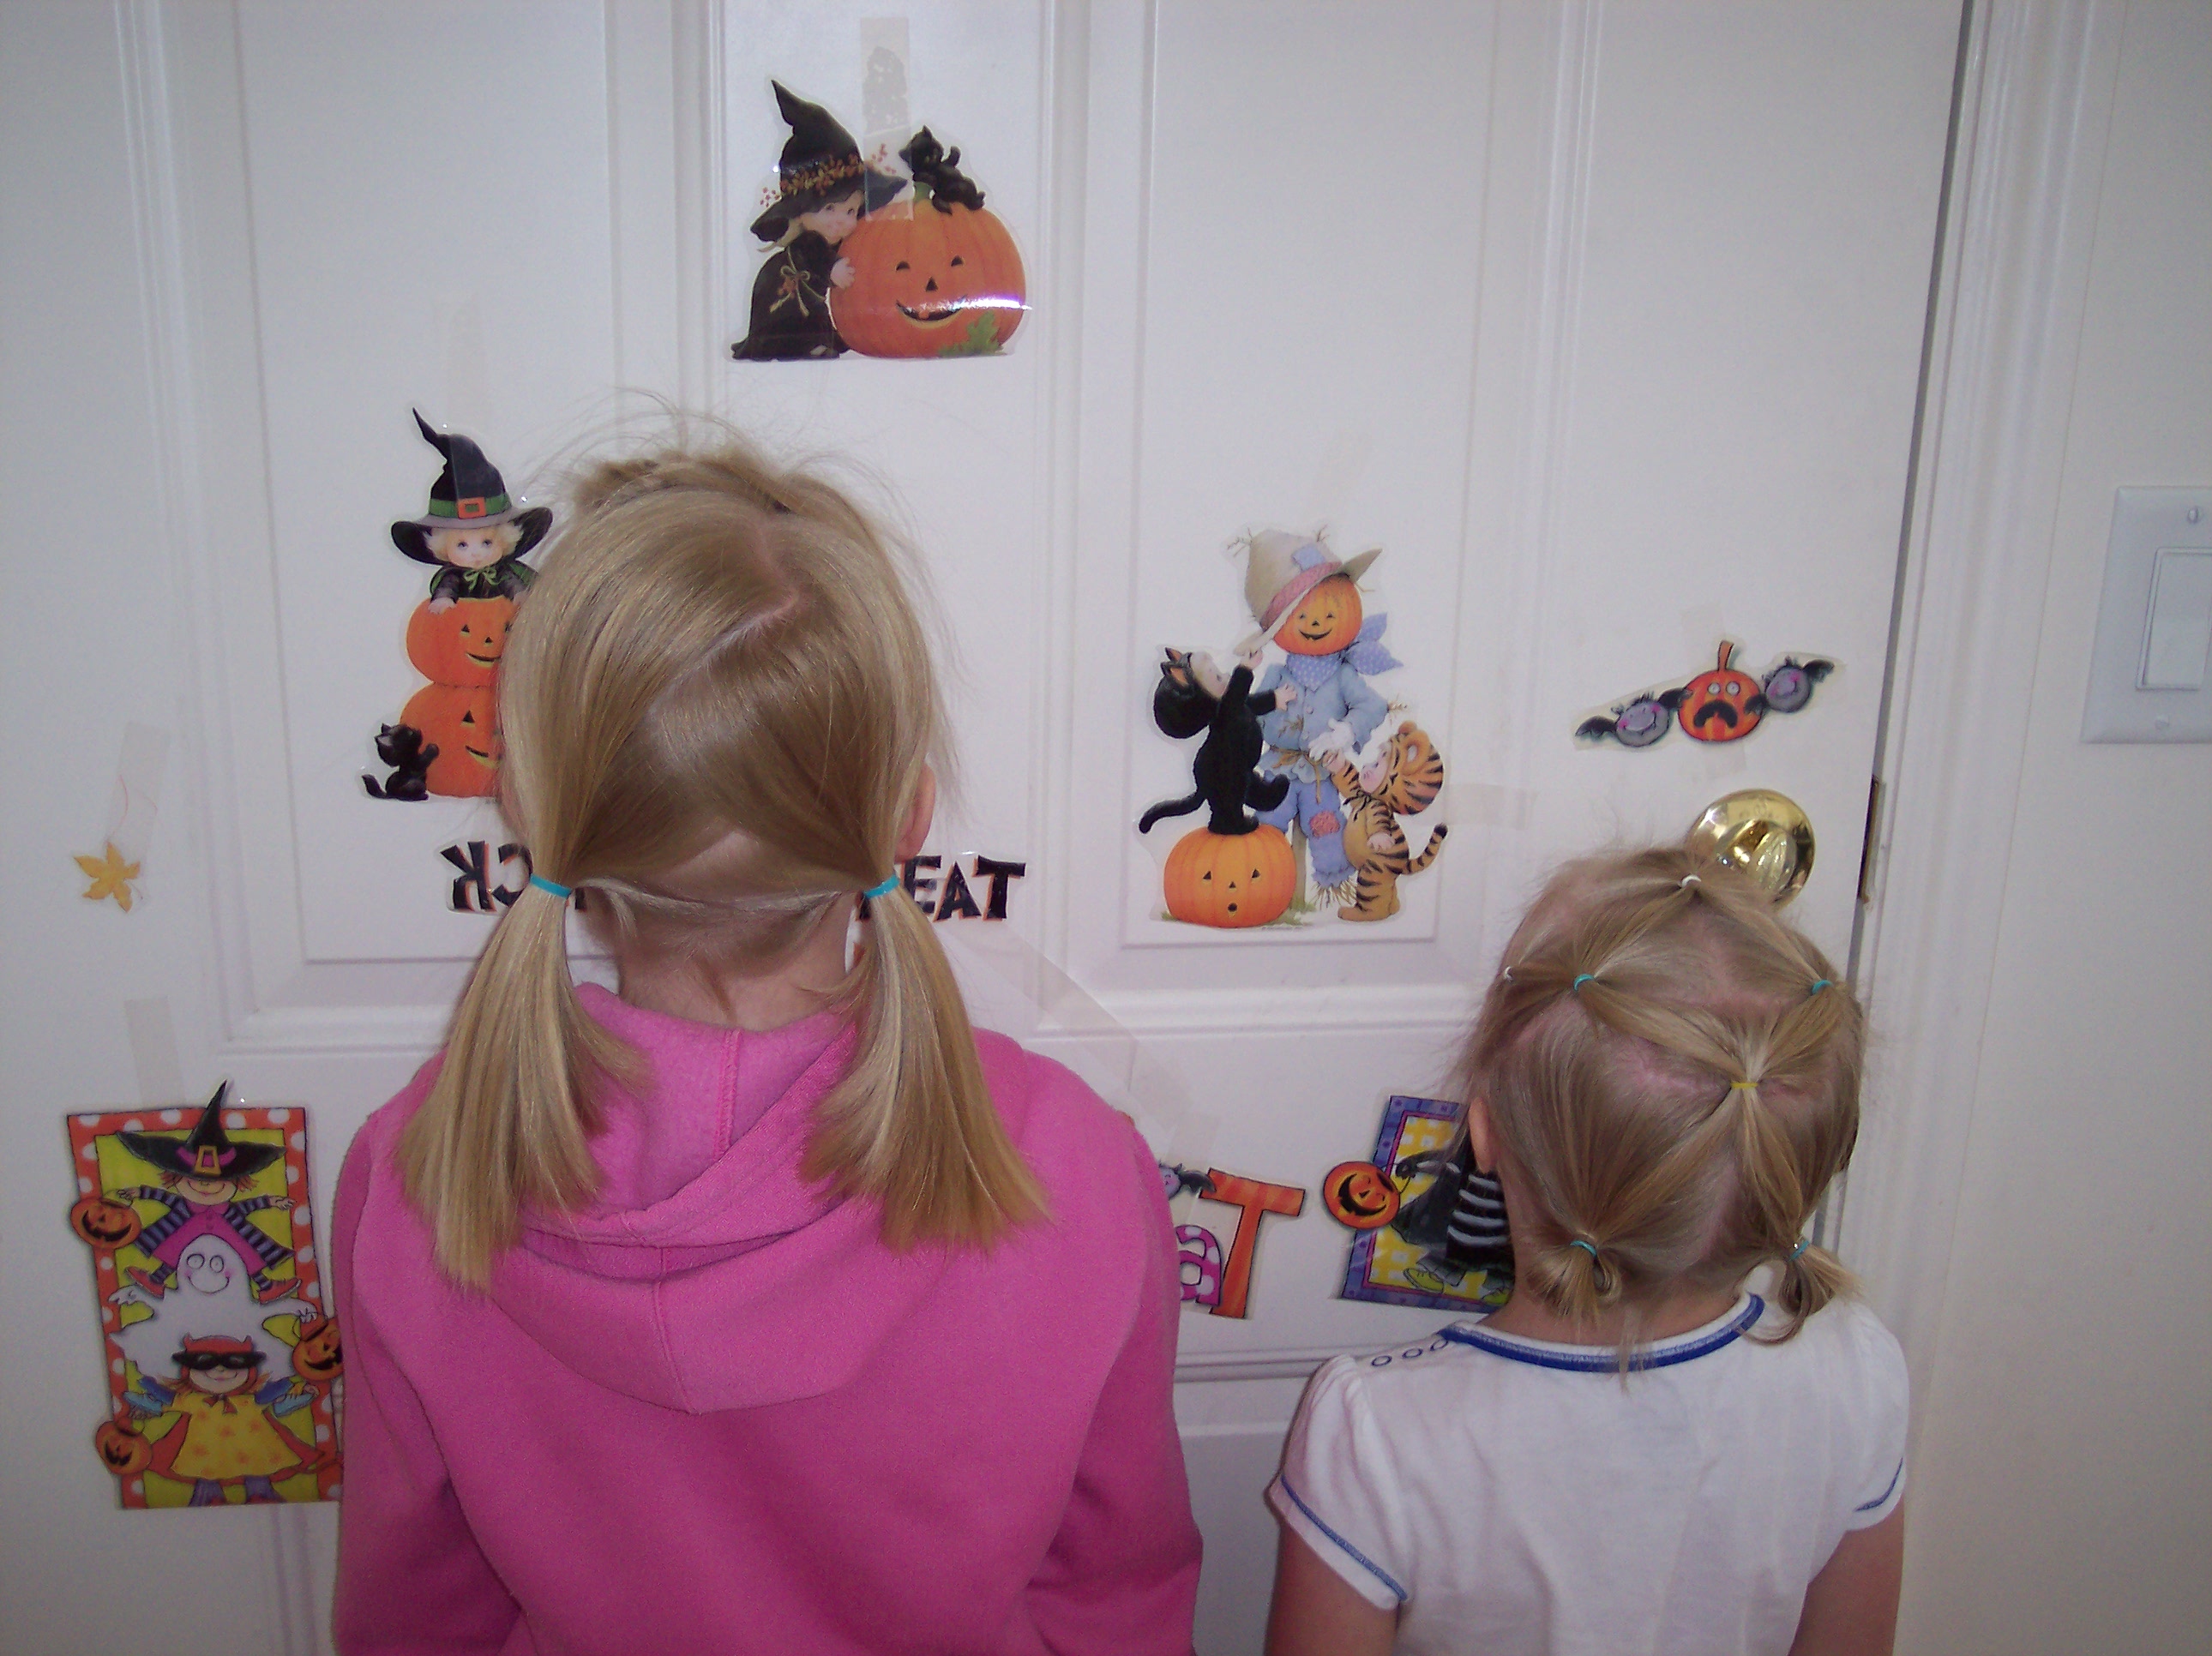 Emma and Sarah showing off their hair and halloween decorations